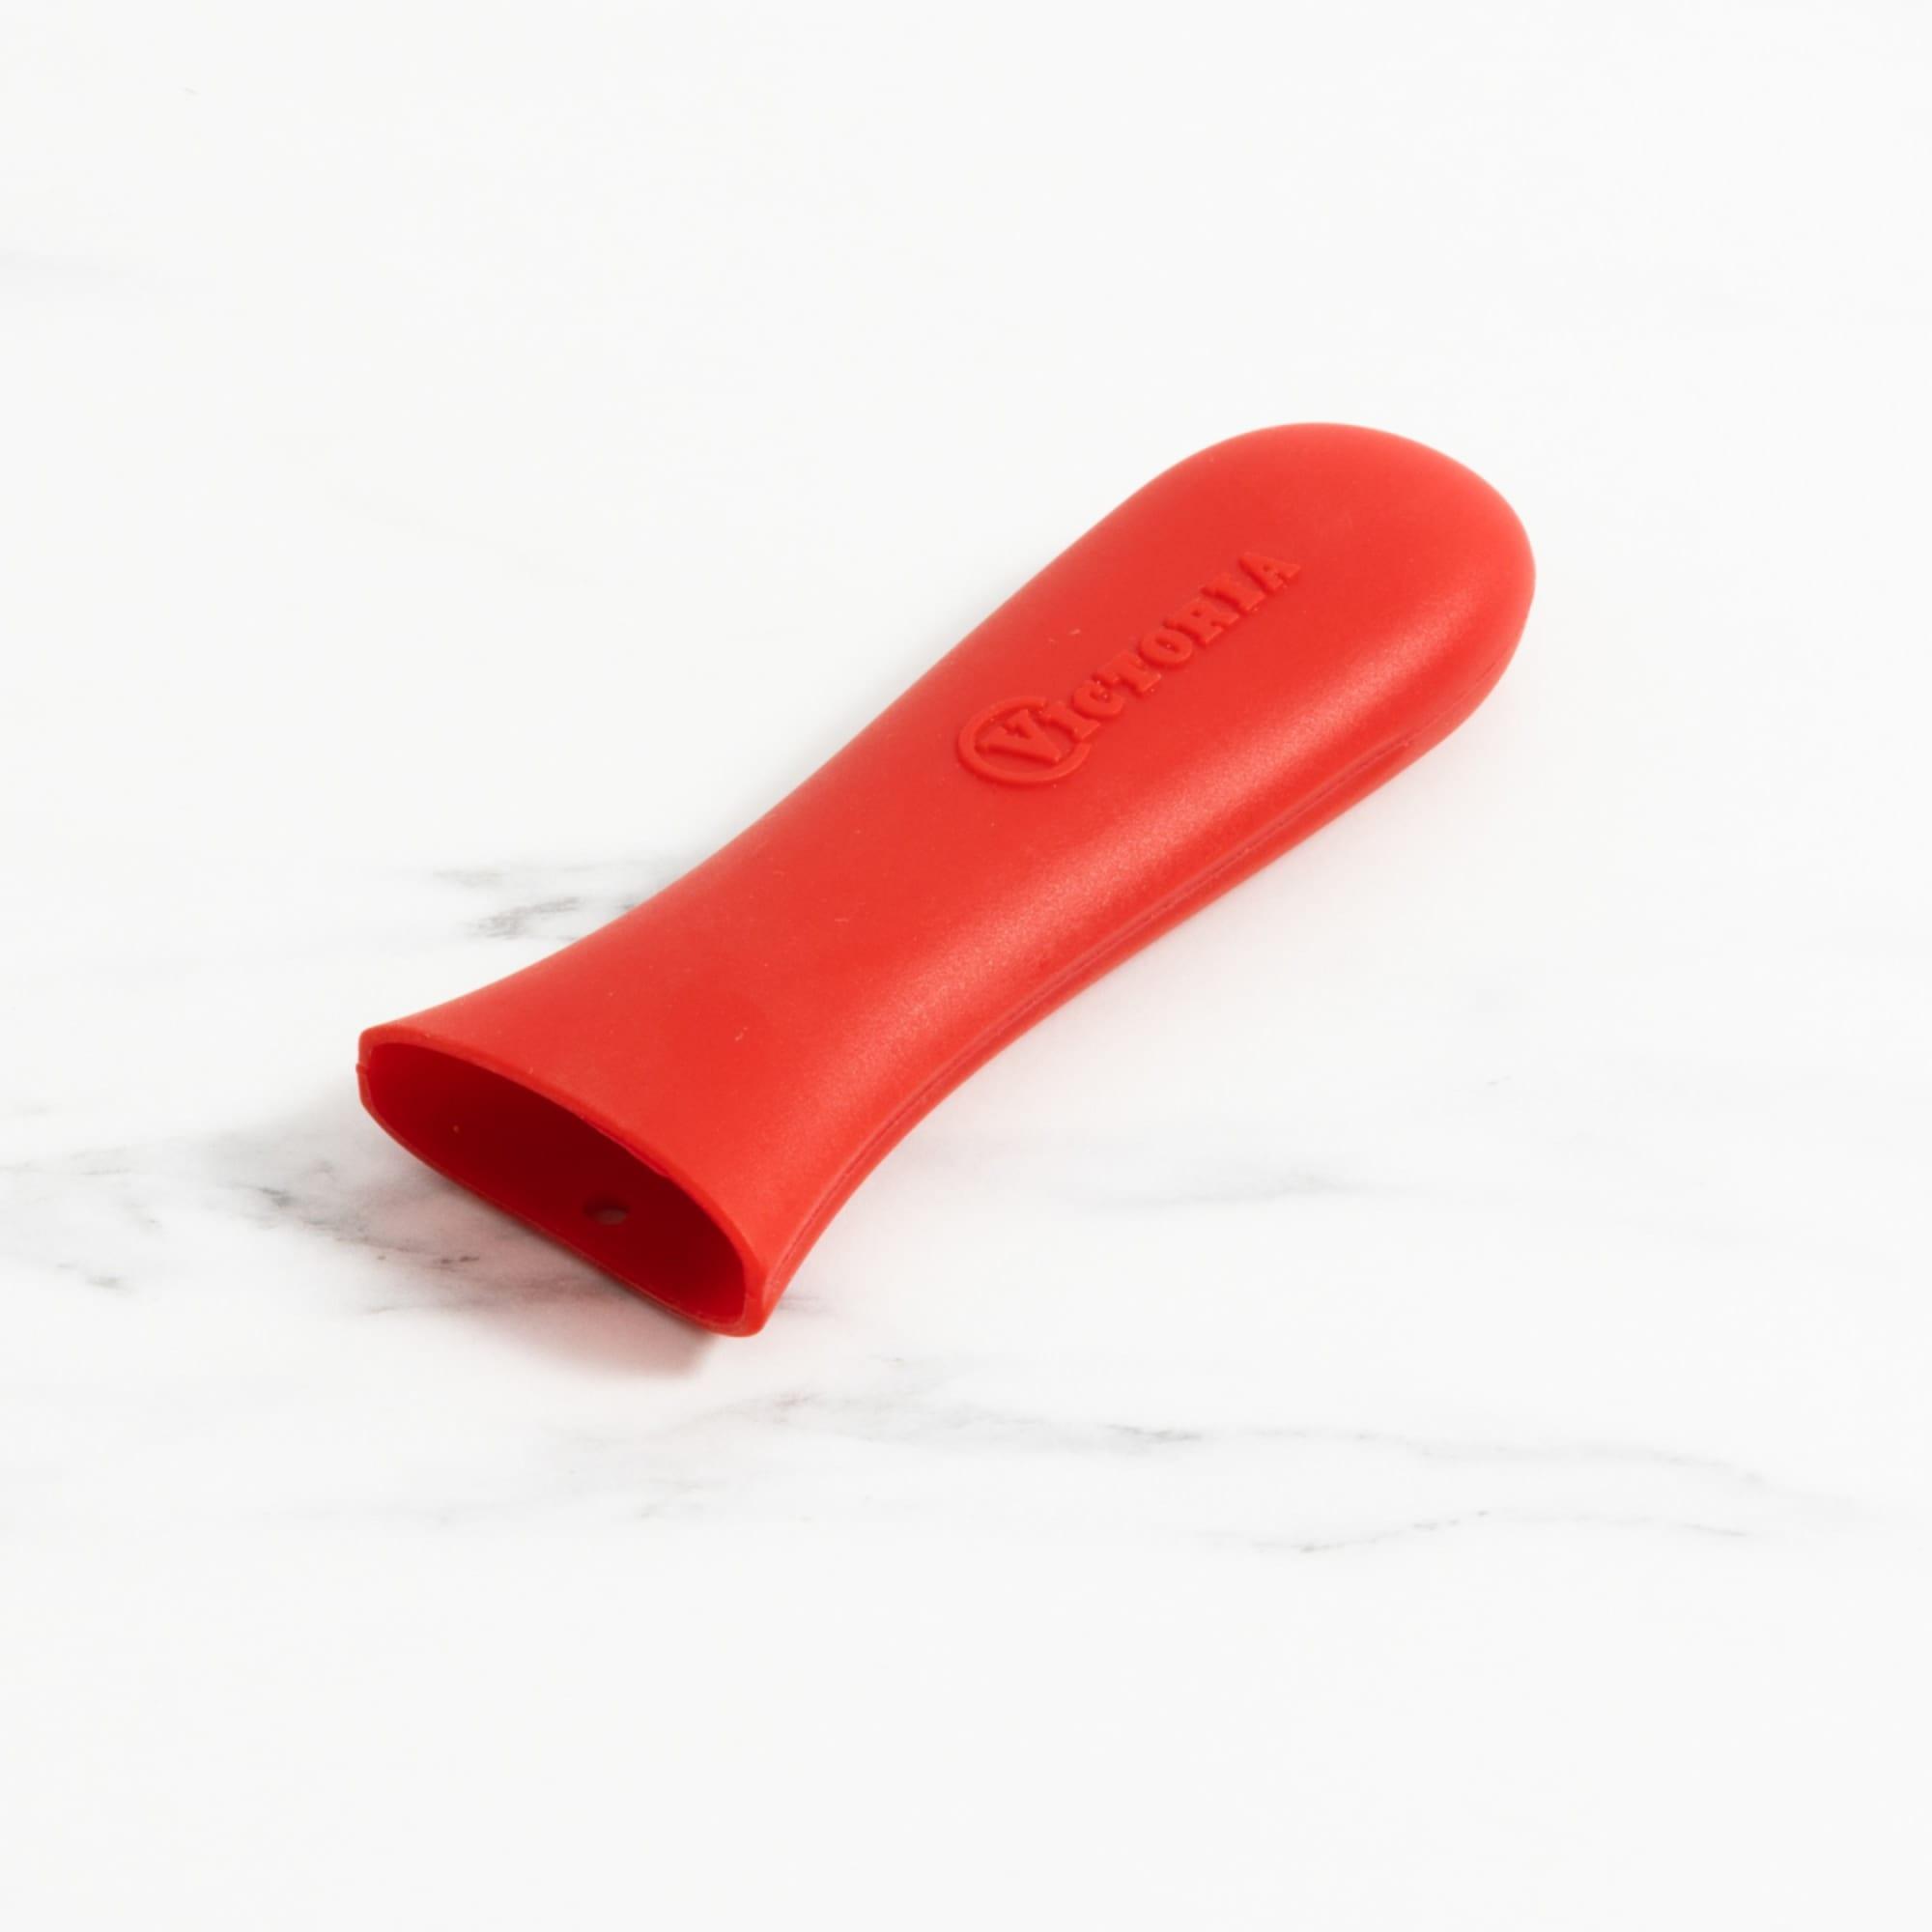 Victoria Silicone Handle Cover Large Image 1